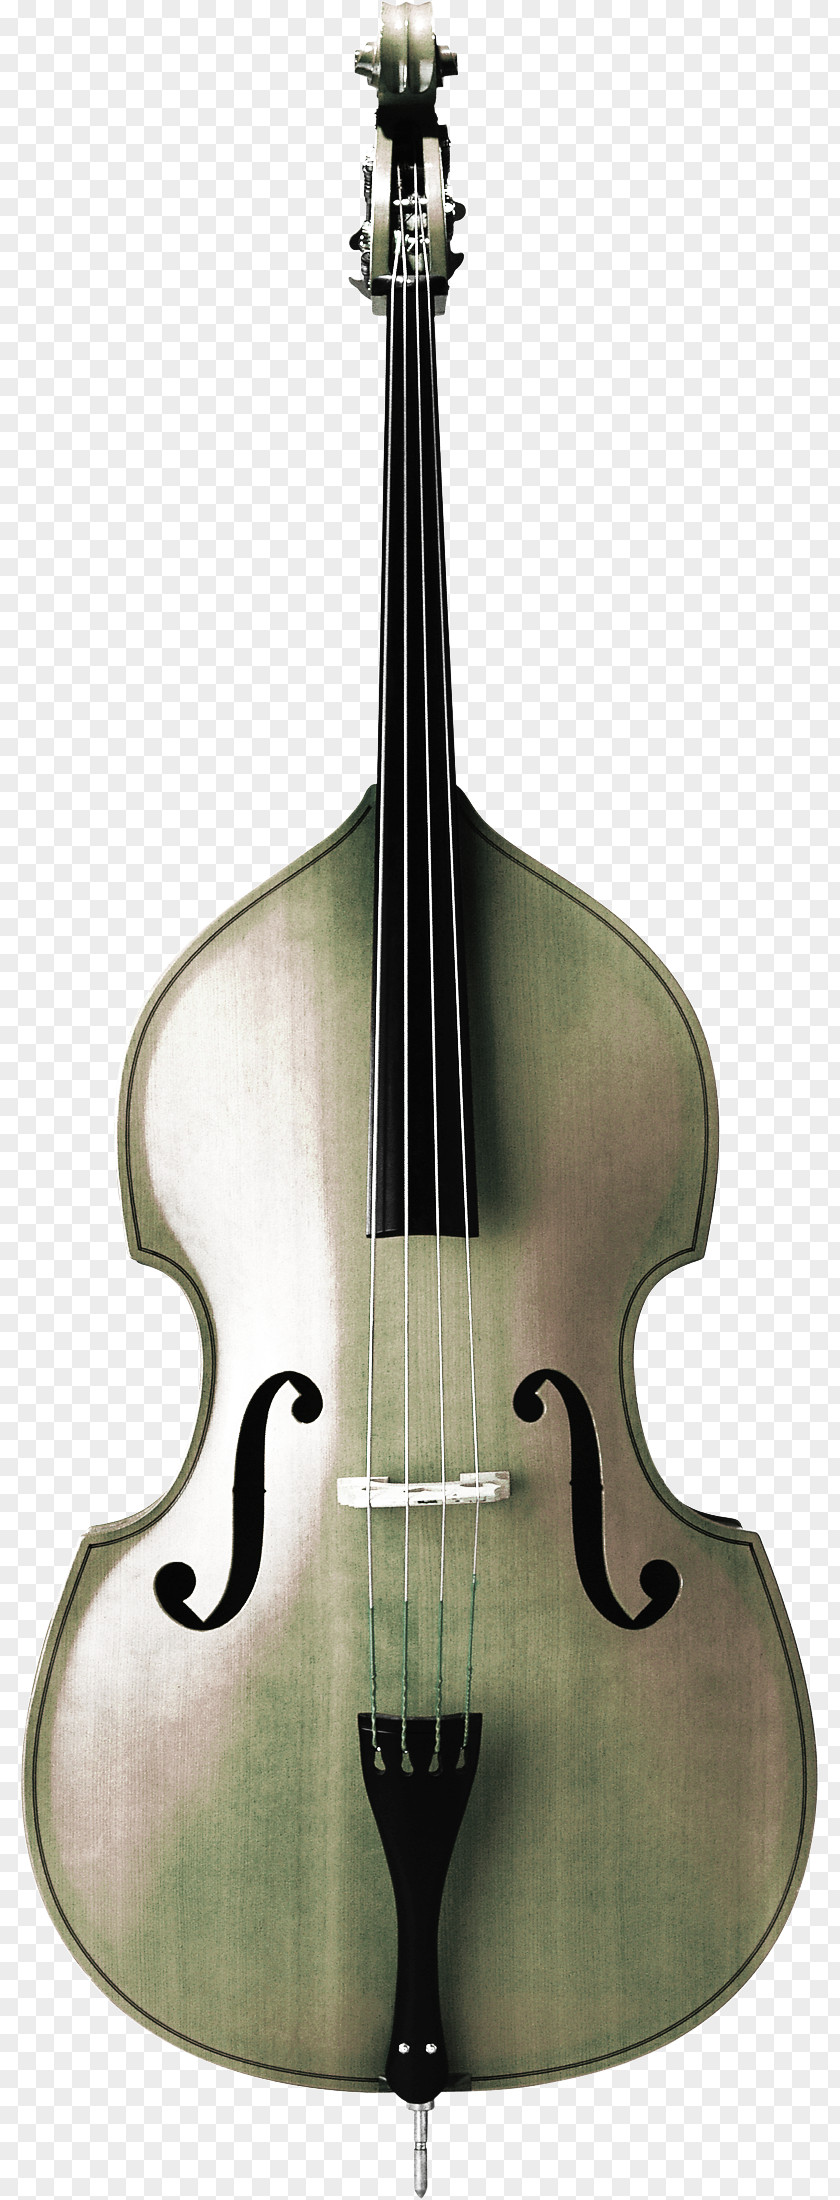 Guitar Bass Violin Violone Cello Musical Instrument PNG